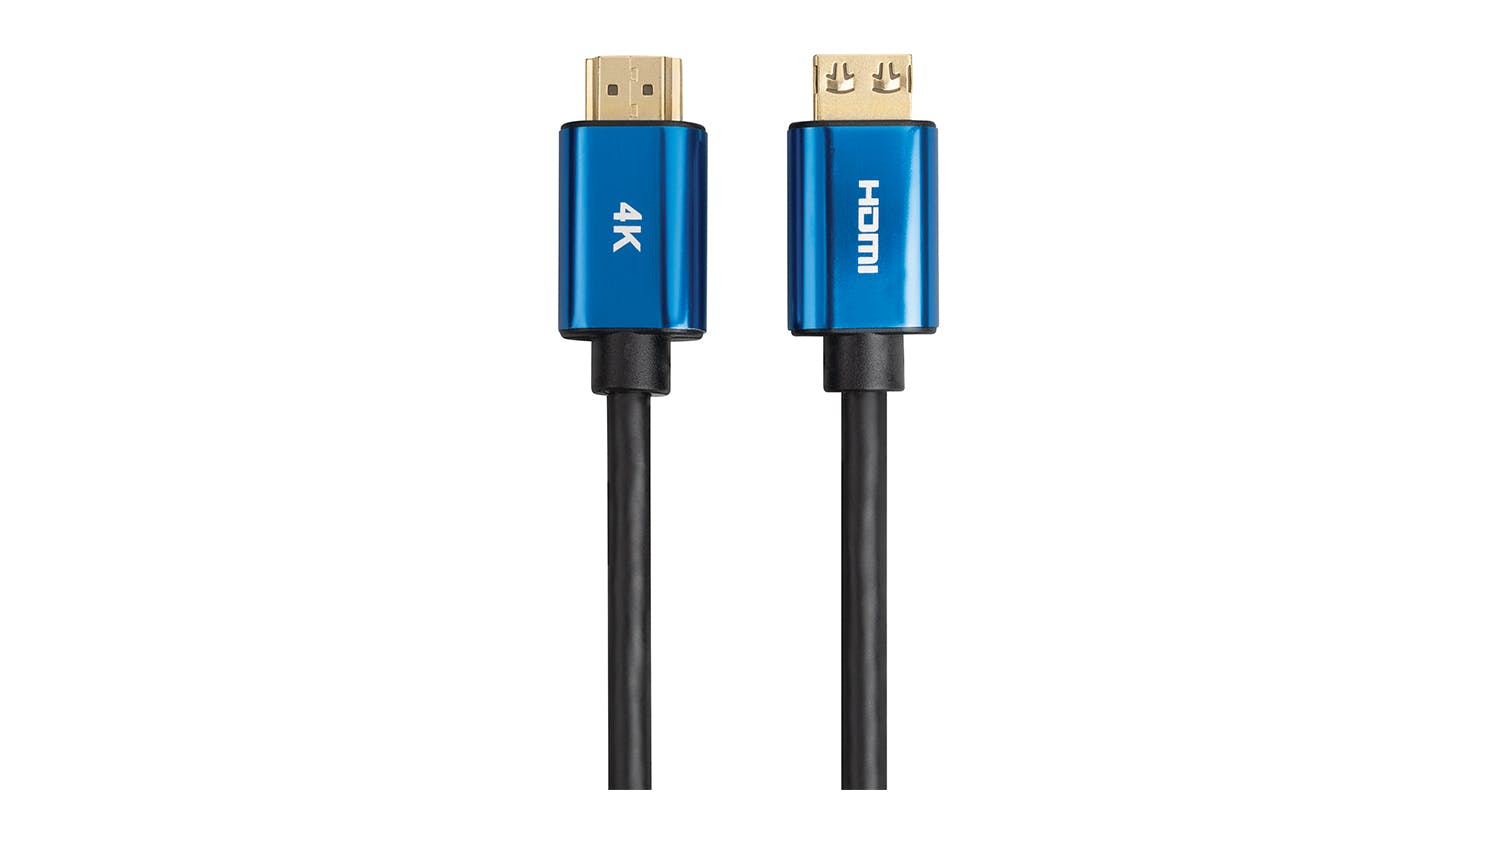 Vanco Bluejet 22.5 Gbps HDMI ARC Cable with Ethernet - 0.91m (BJVP1001) Supports 4K @ 60Hz & HDR